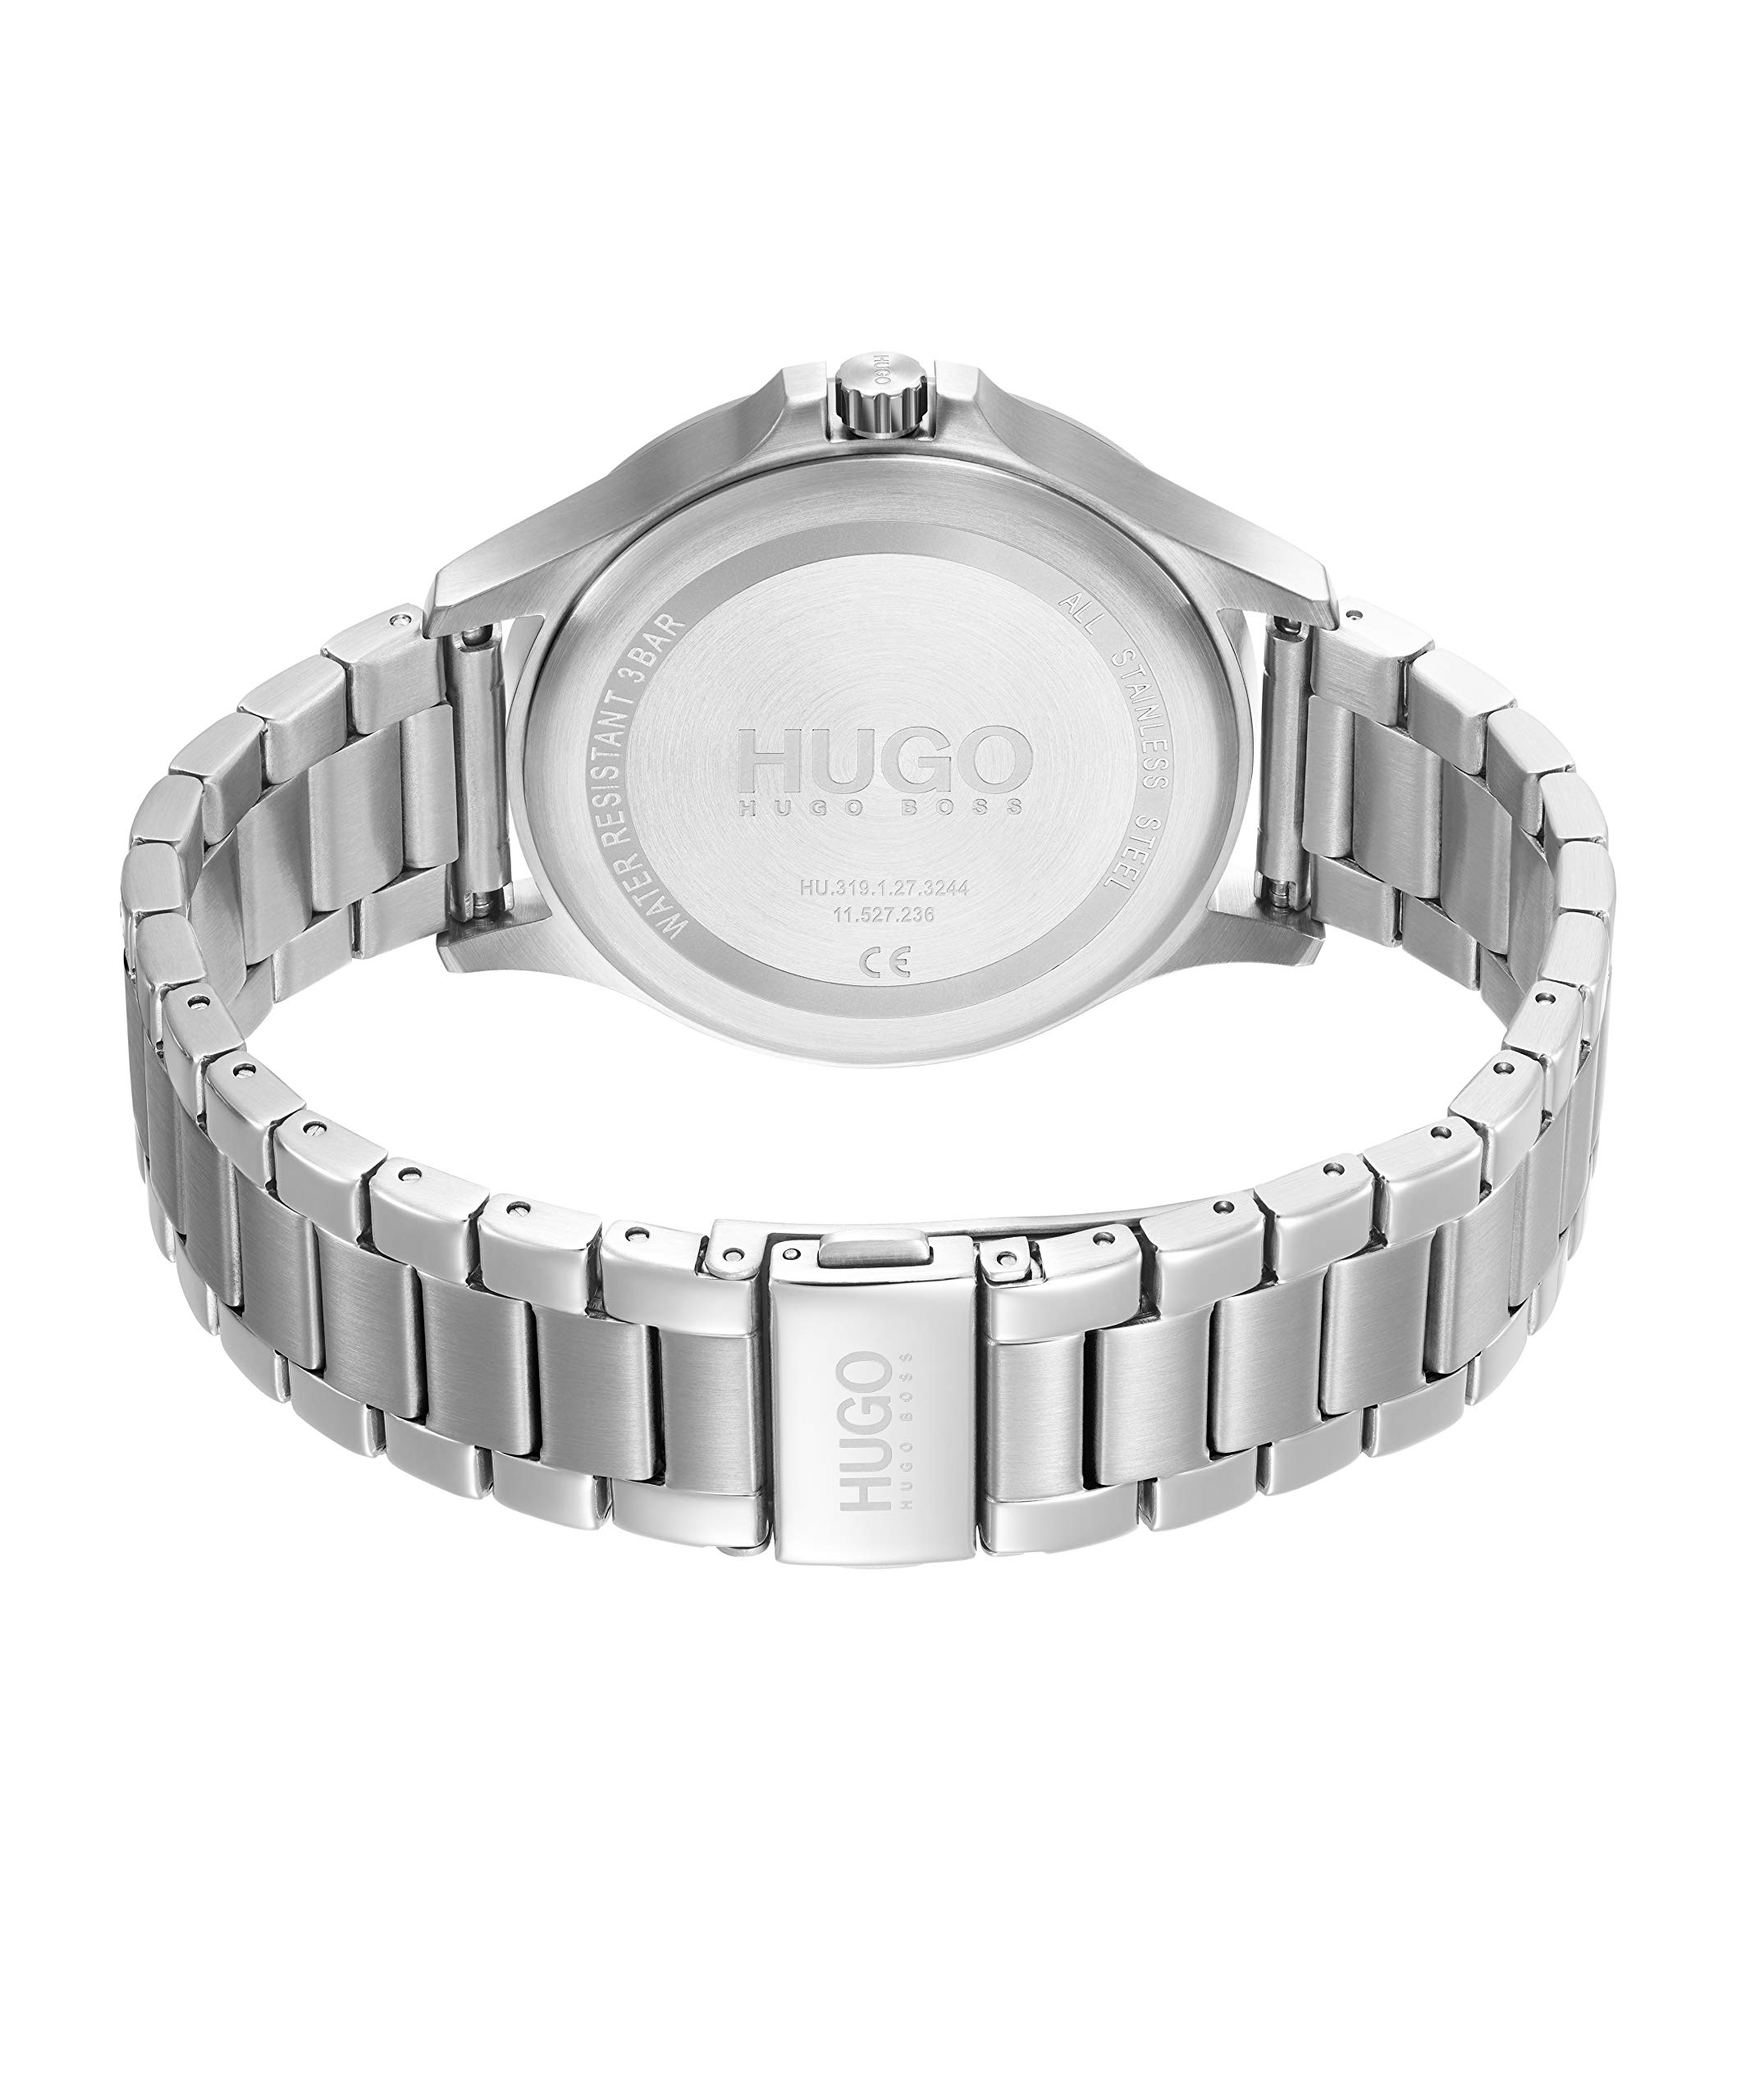 HUGO #LEAP Men's Multifunction Stainless Steel and Link Bracelet Casual Watch, Color: Silver (Model: 1530174)